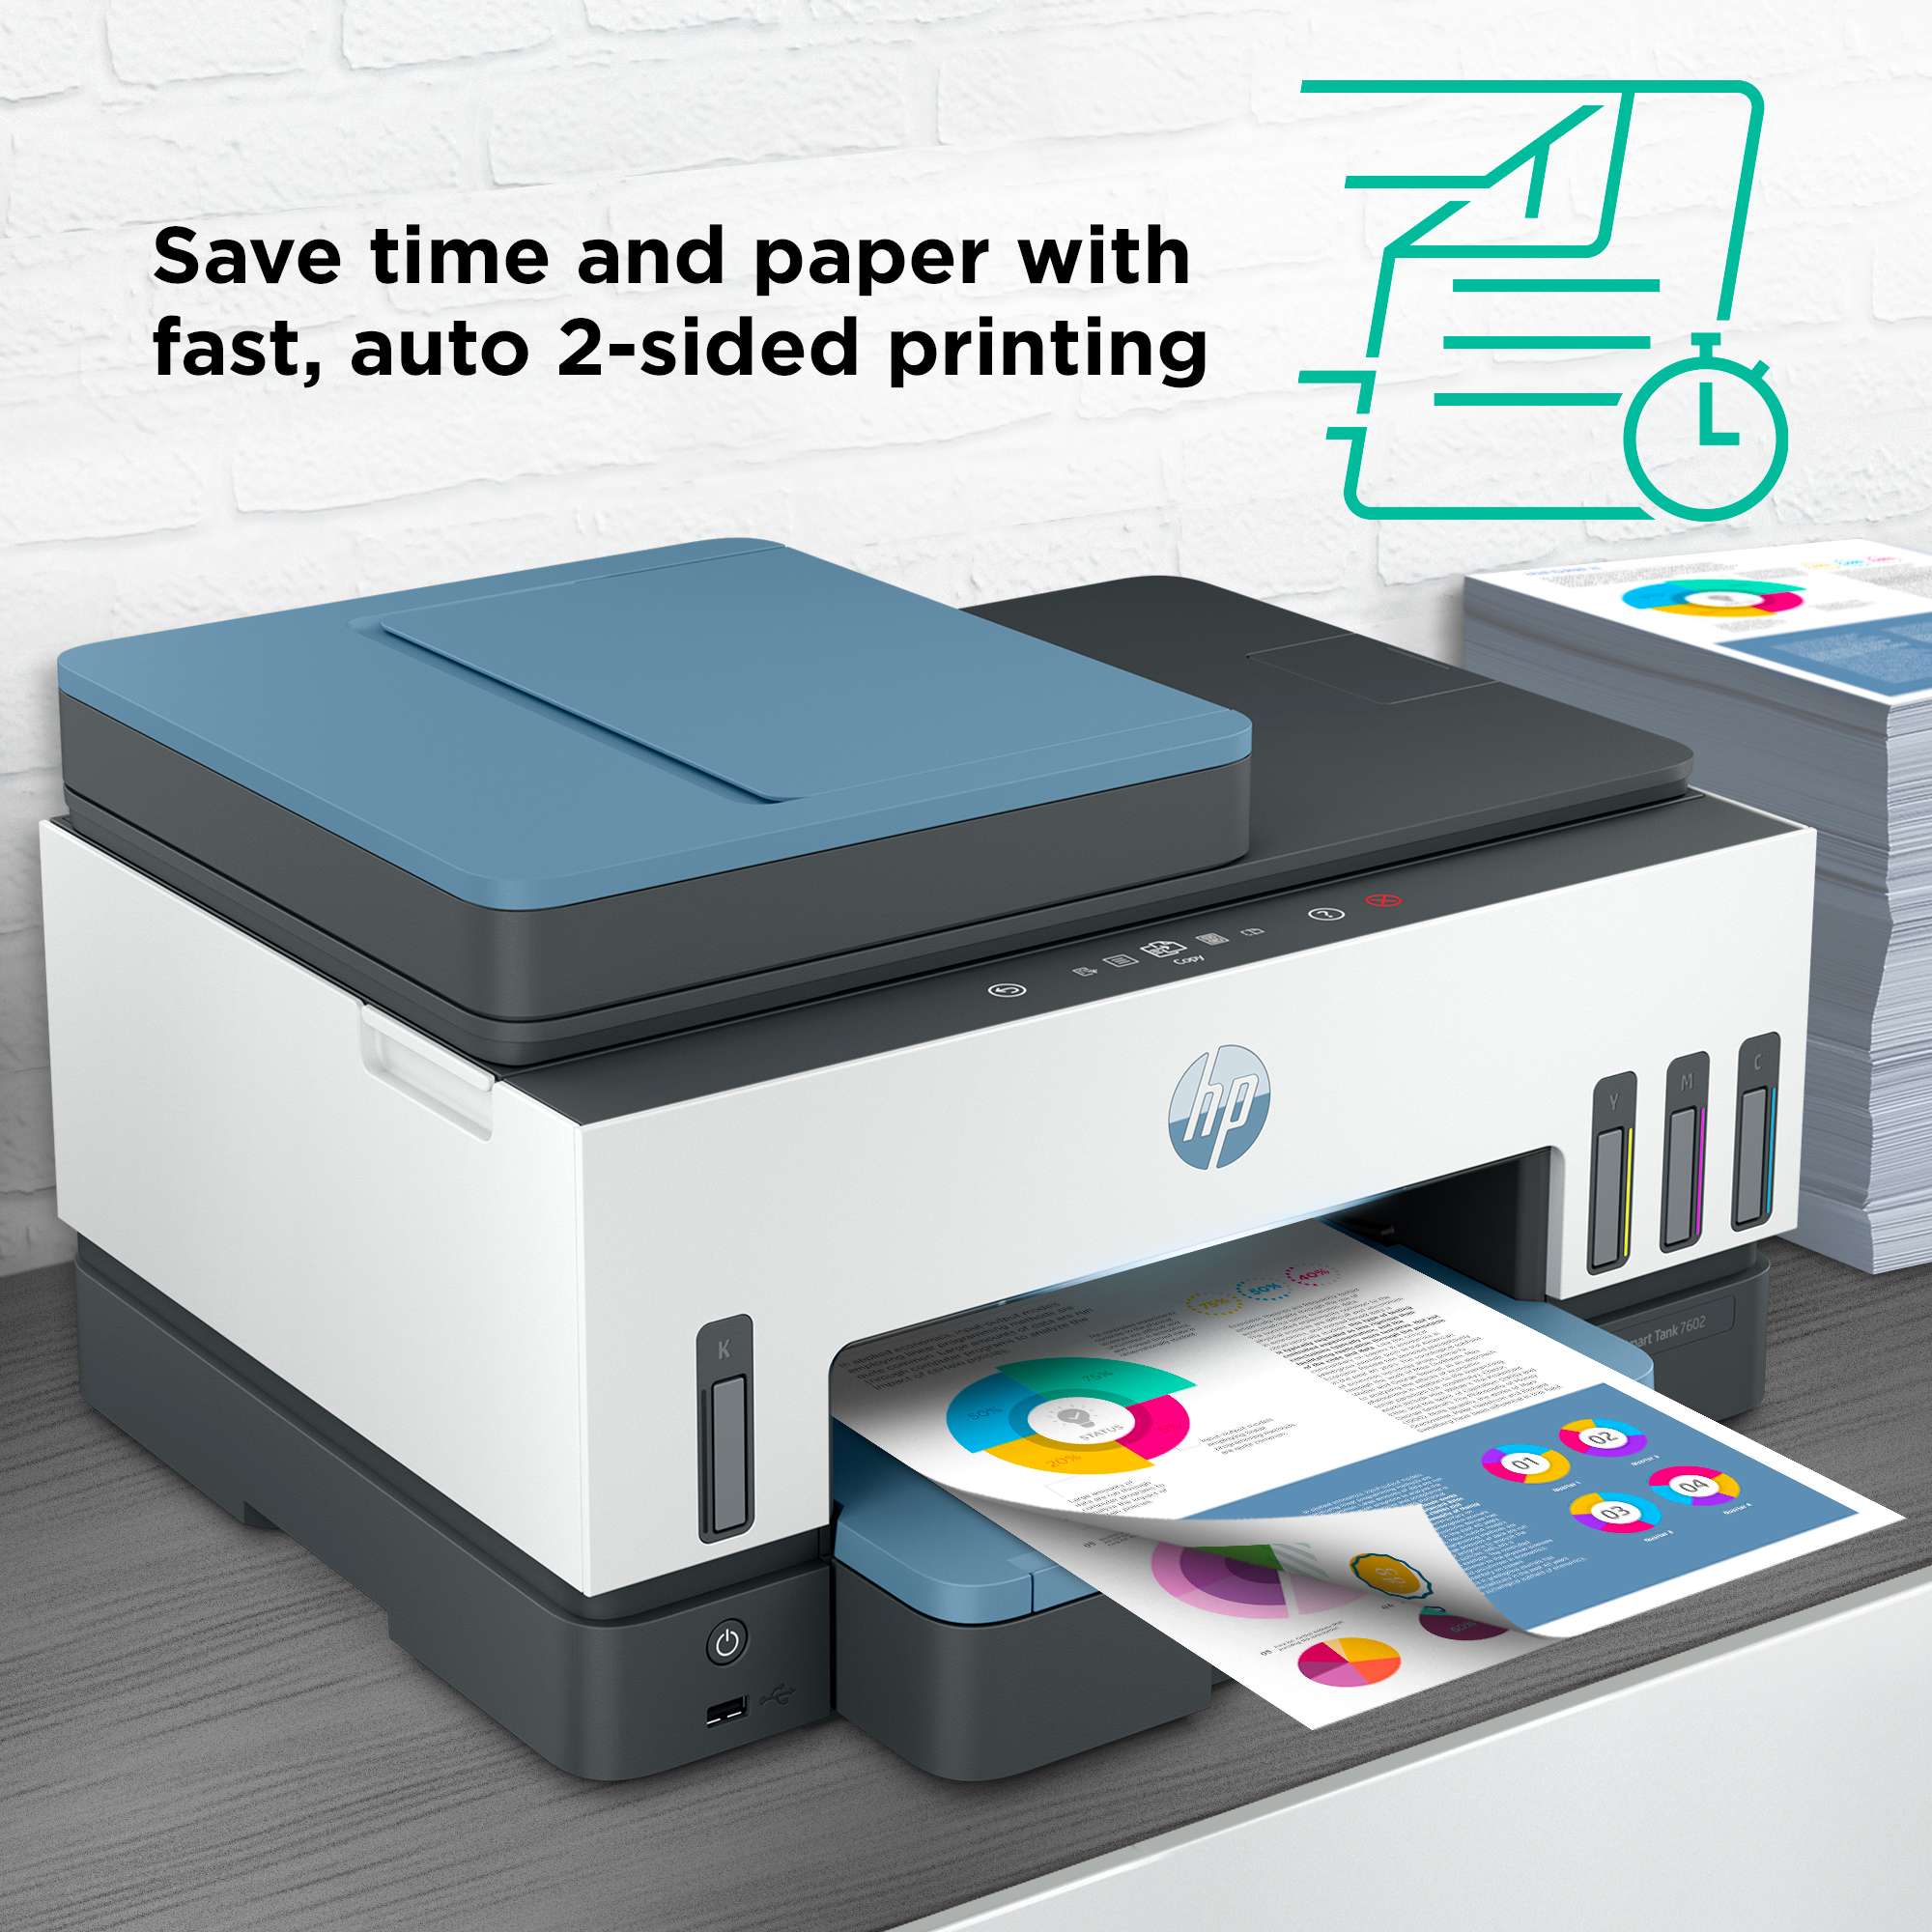 Save time and paper with fast, auto 2-sided printing